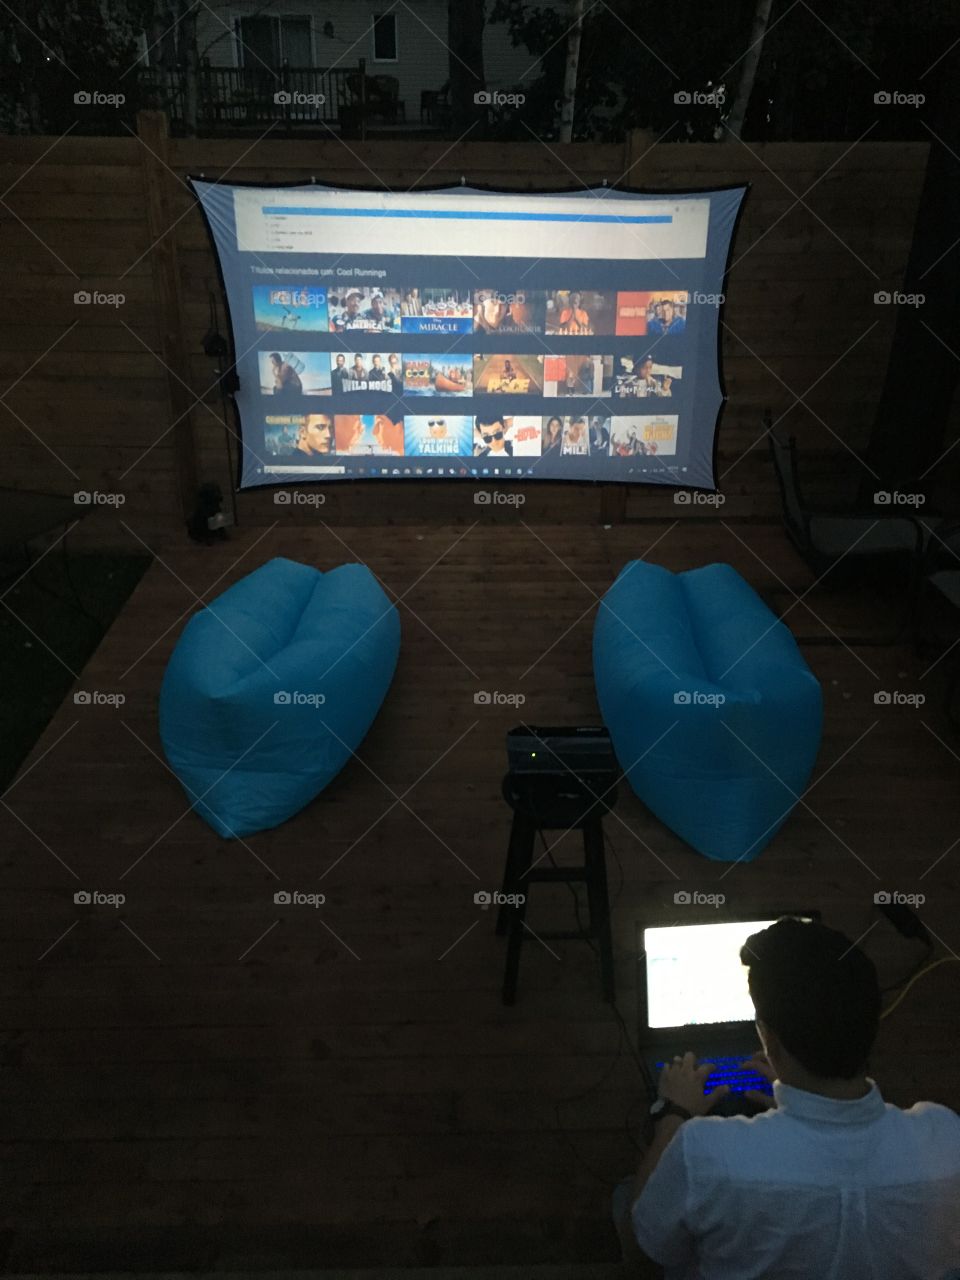 Awesome outdoor home cinema at night on projector